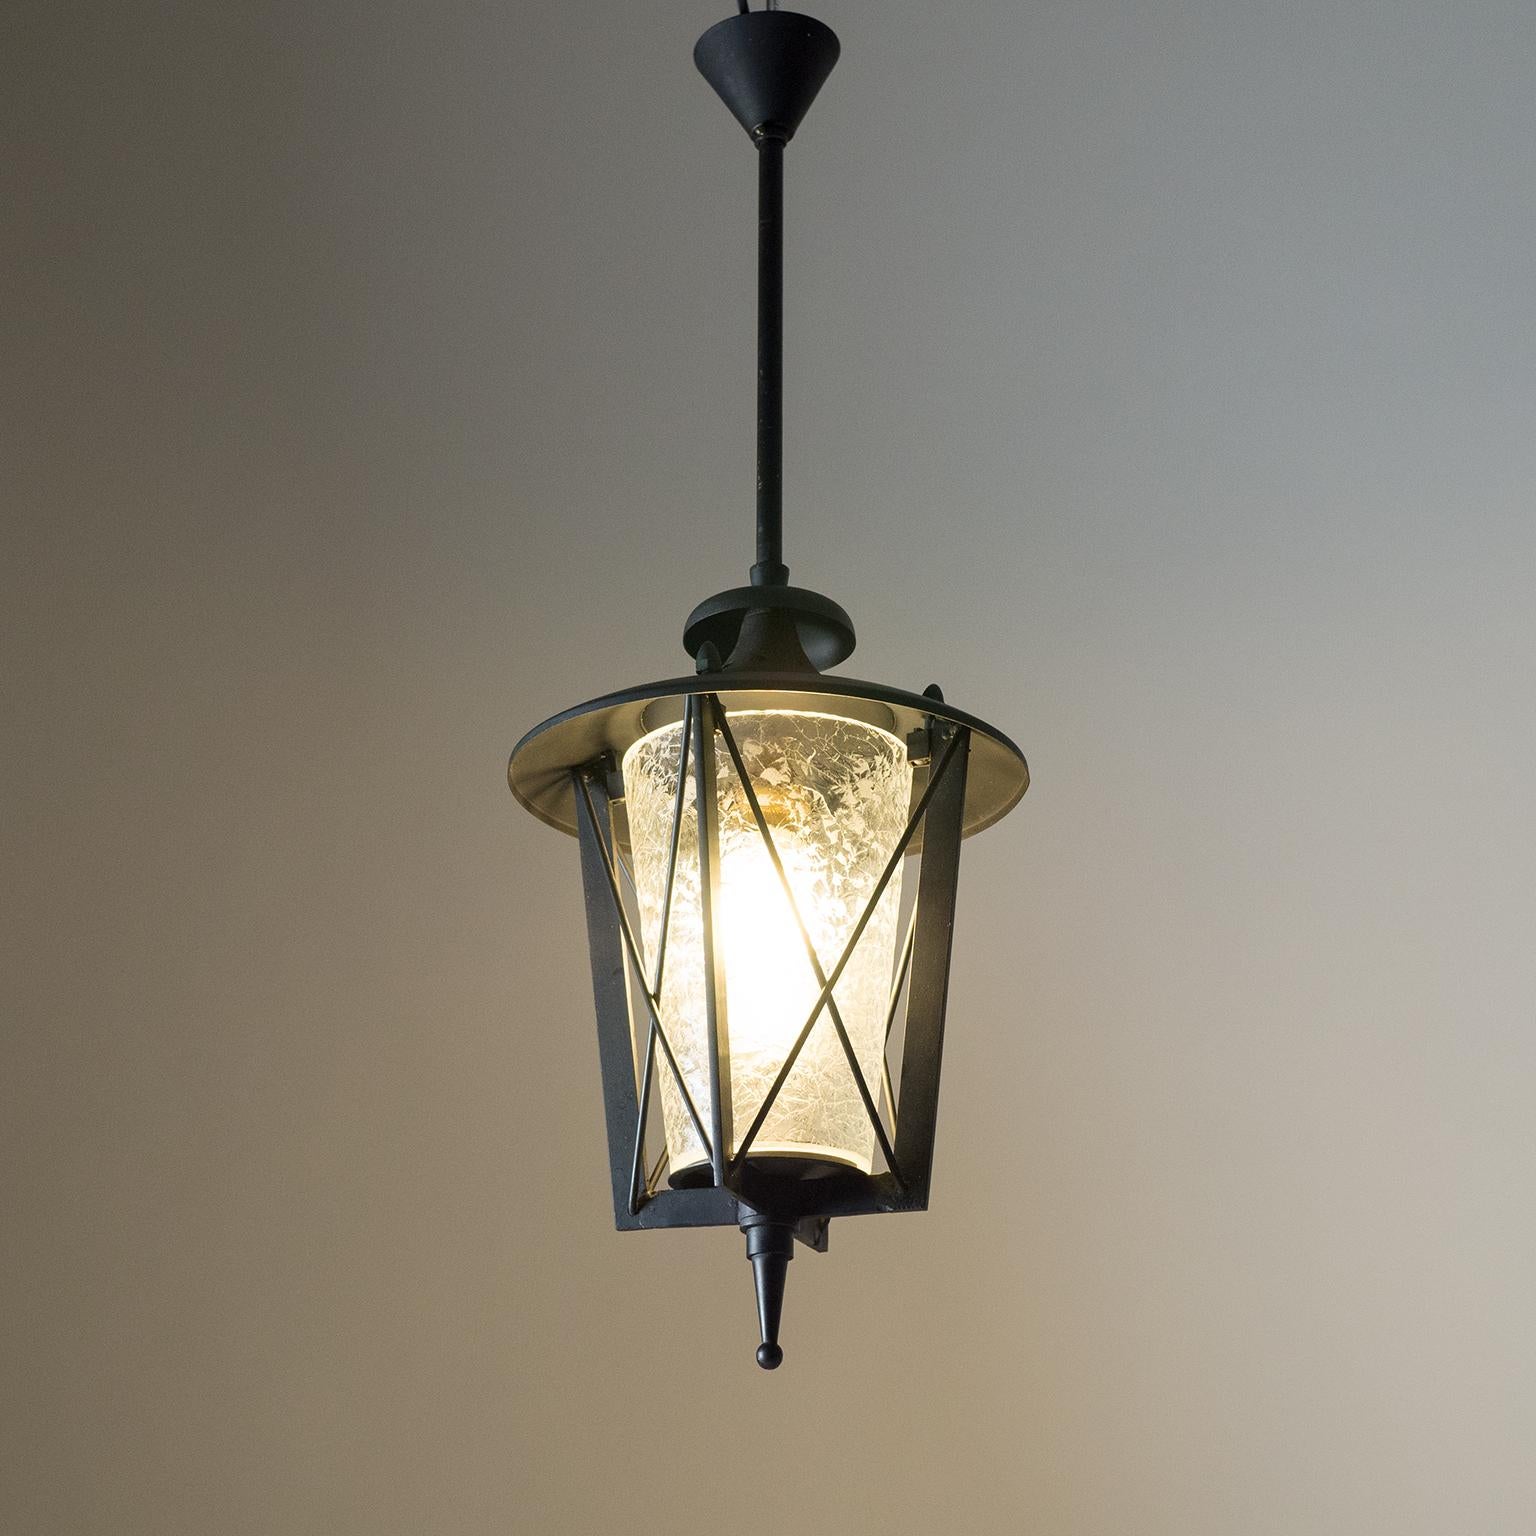 Mid-20th Century 1950s French Lantern with Chiseled Glass